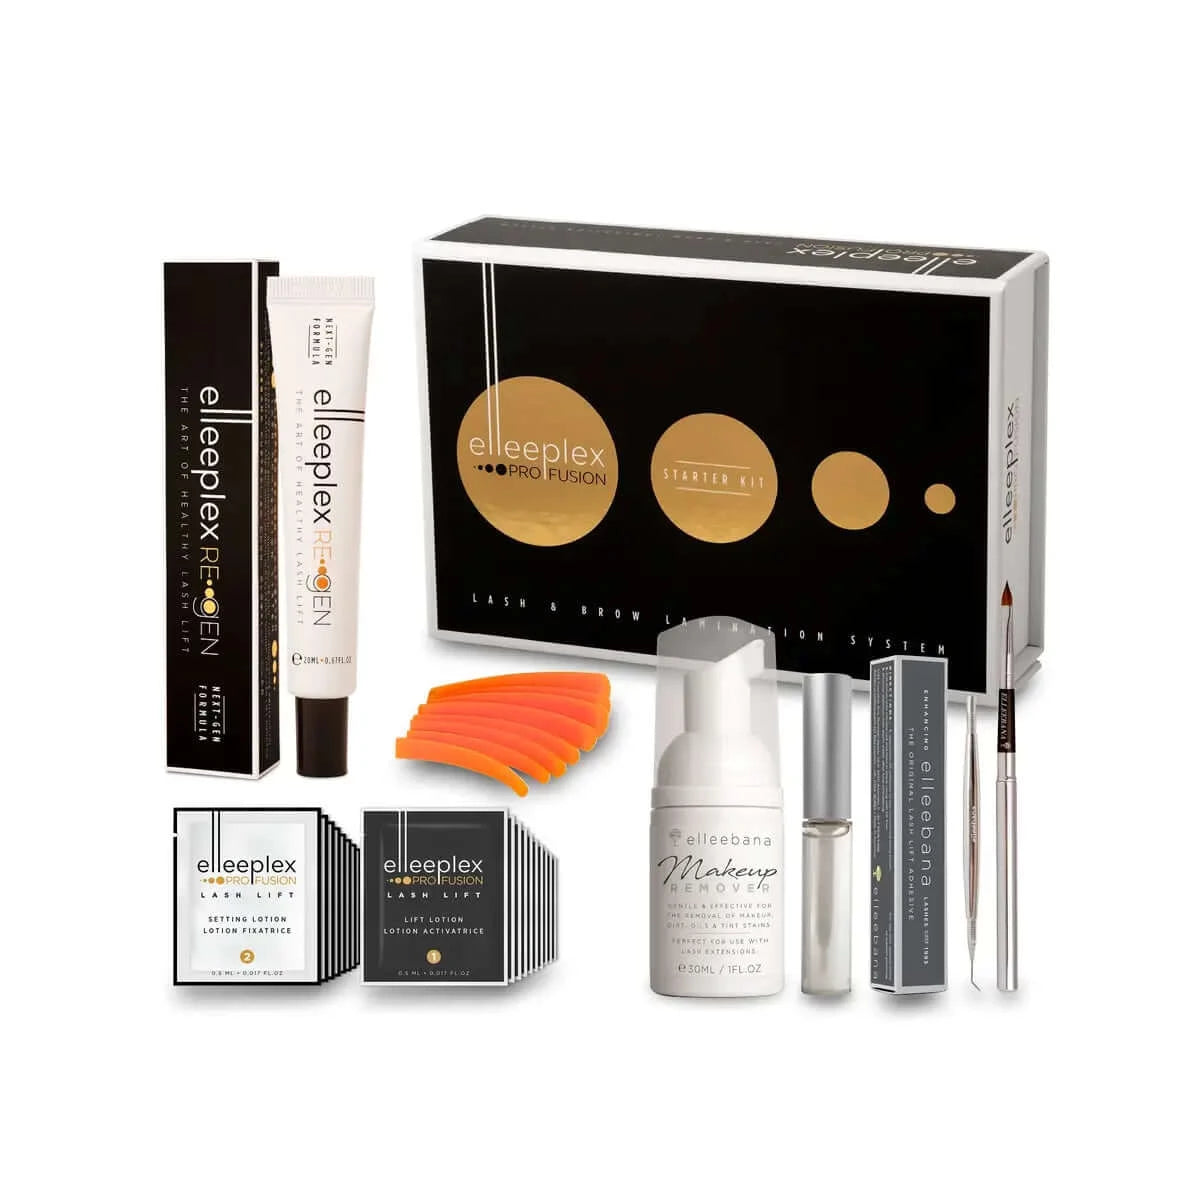 Elleebana Elleeplex Profusion Brow and Lash Lamination kit that comes with the continuing education course